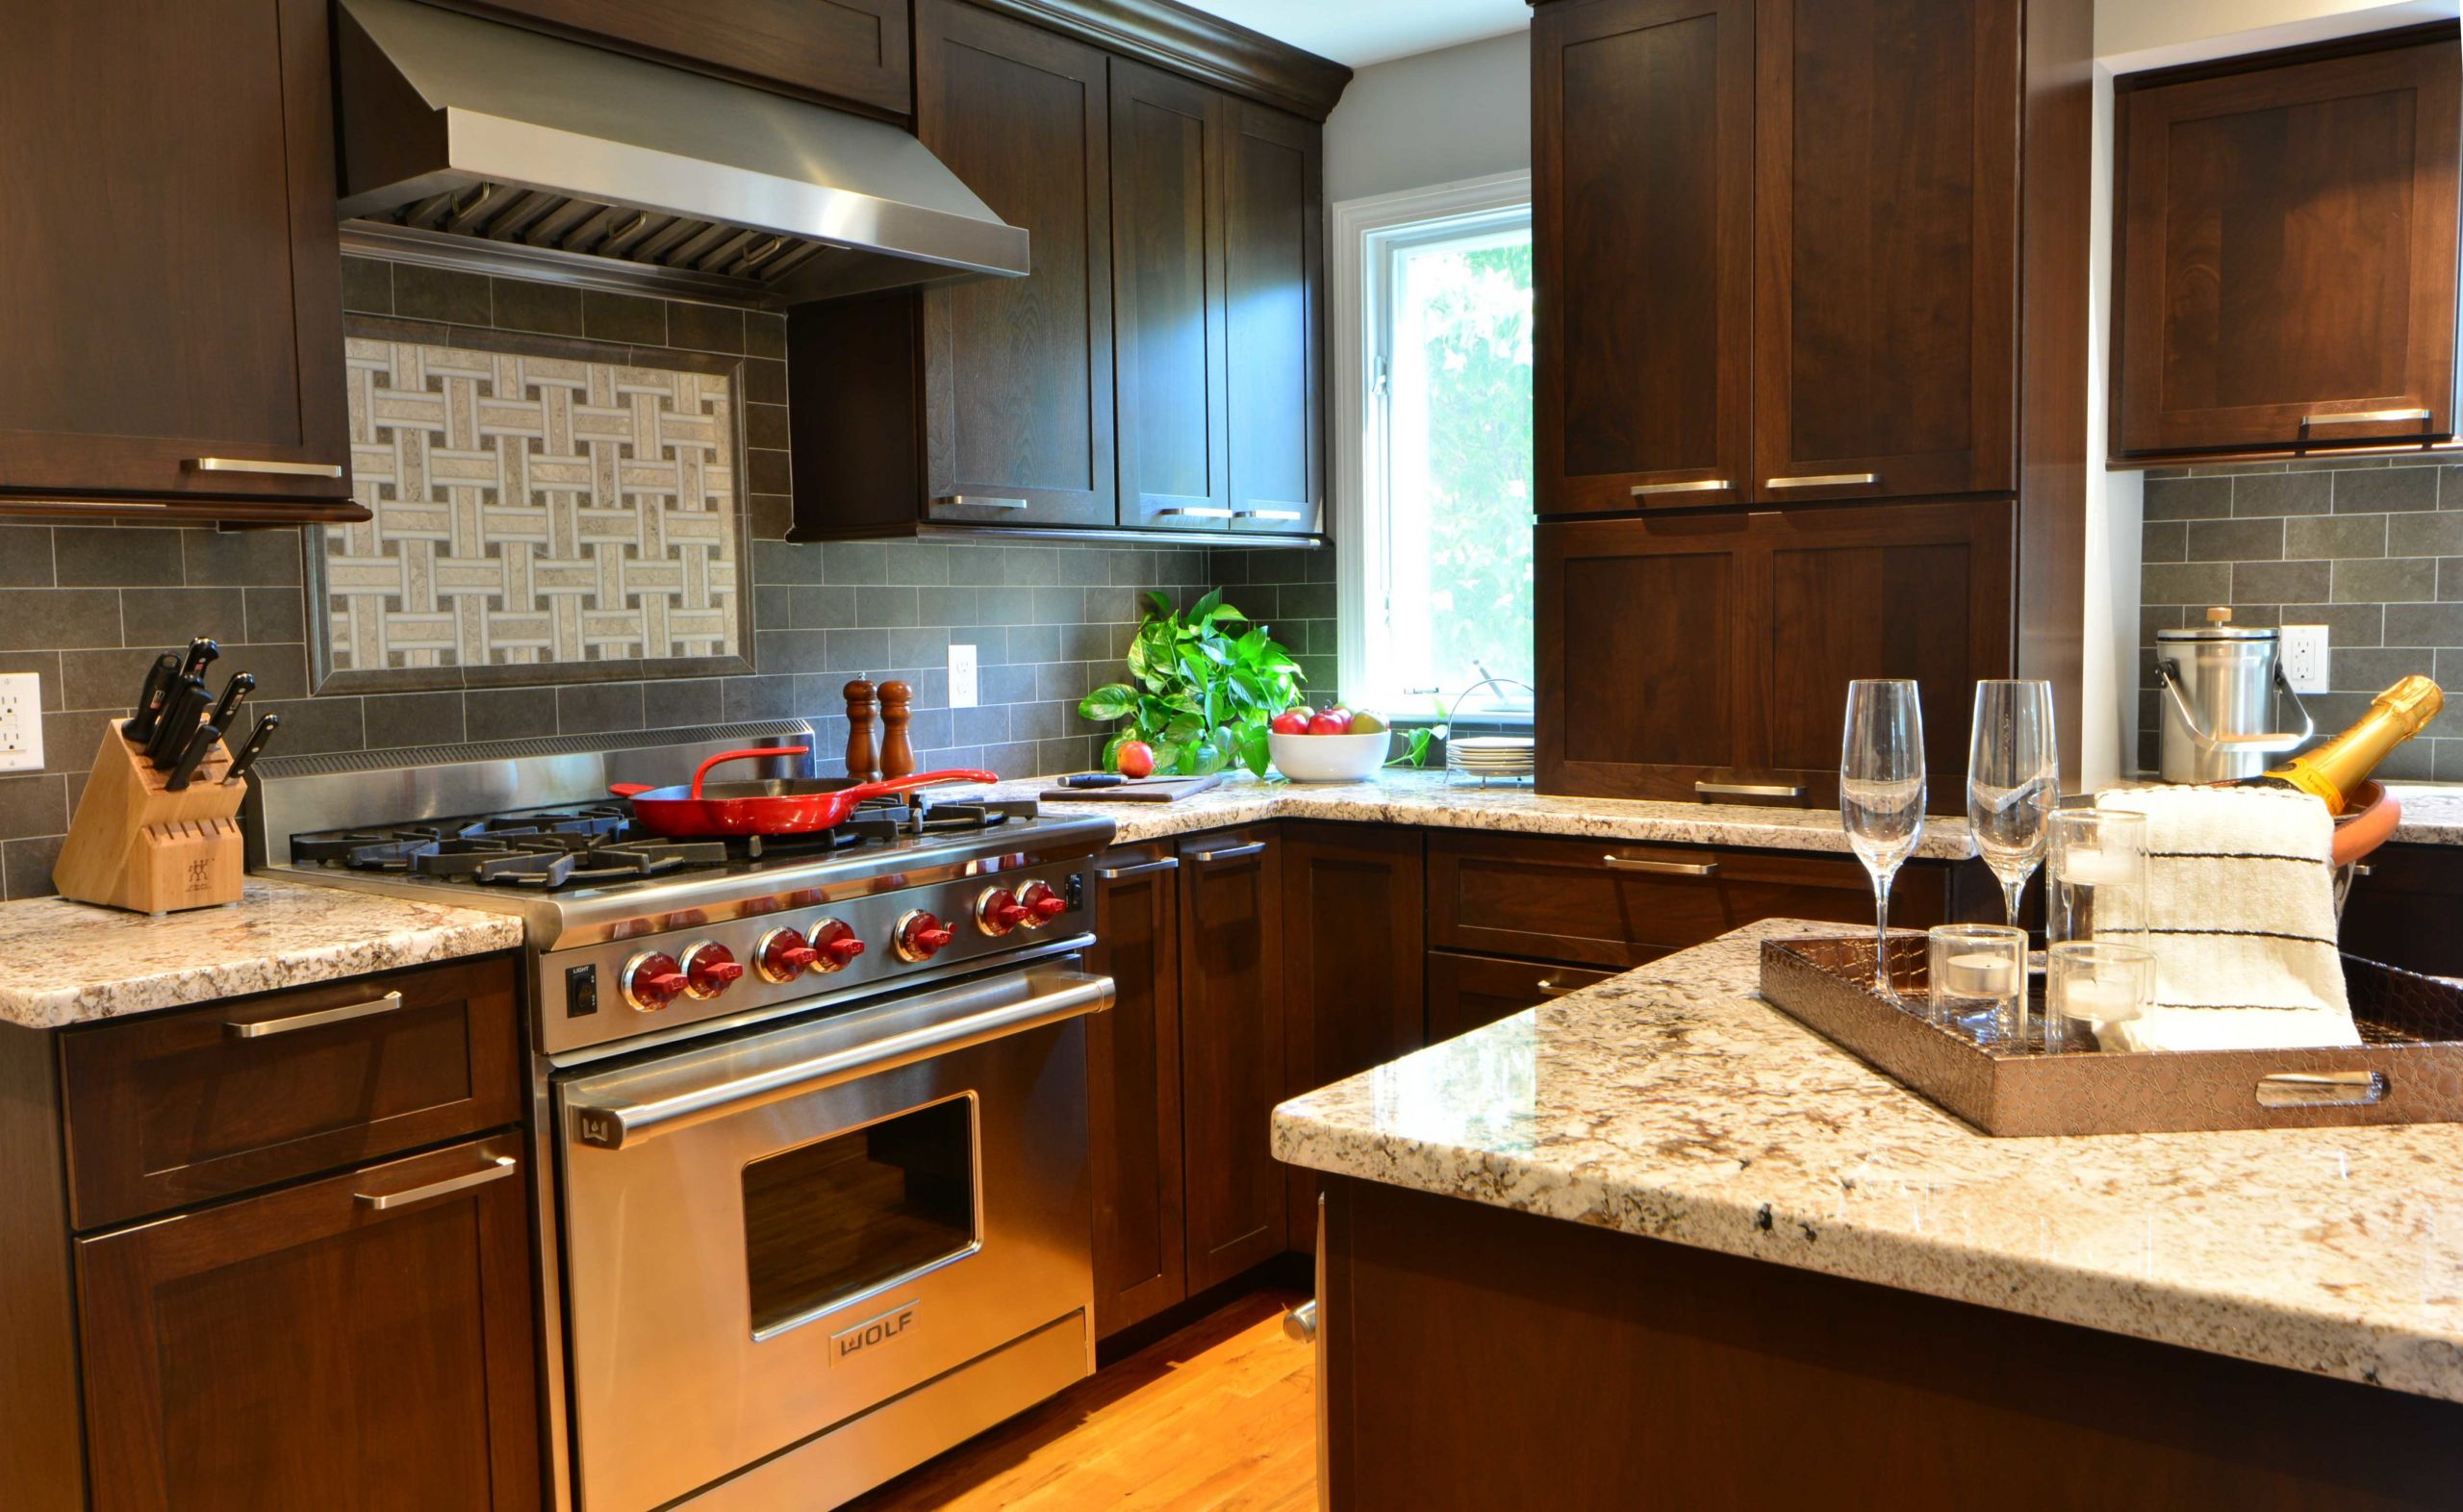 Kitchen Remodel Pricing
 Kitchen Kitchen Project With Small Kitchen Remodel Cost